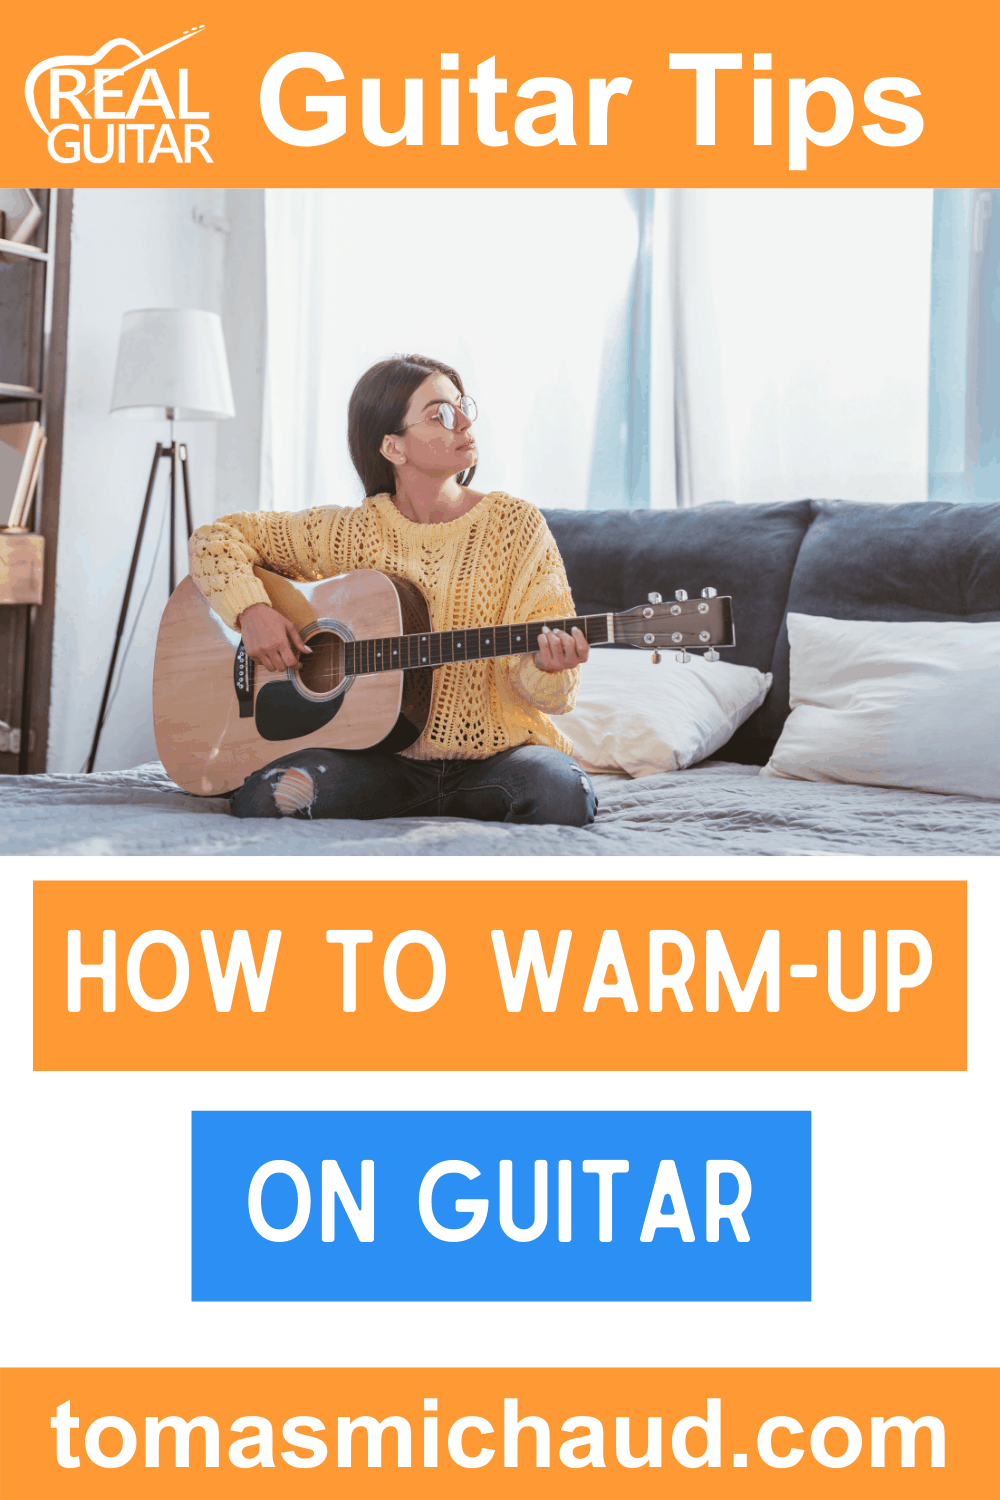 How to Warm-Up on Guitar